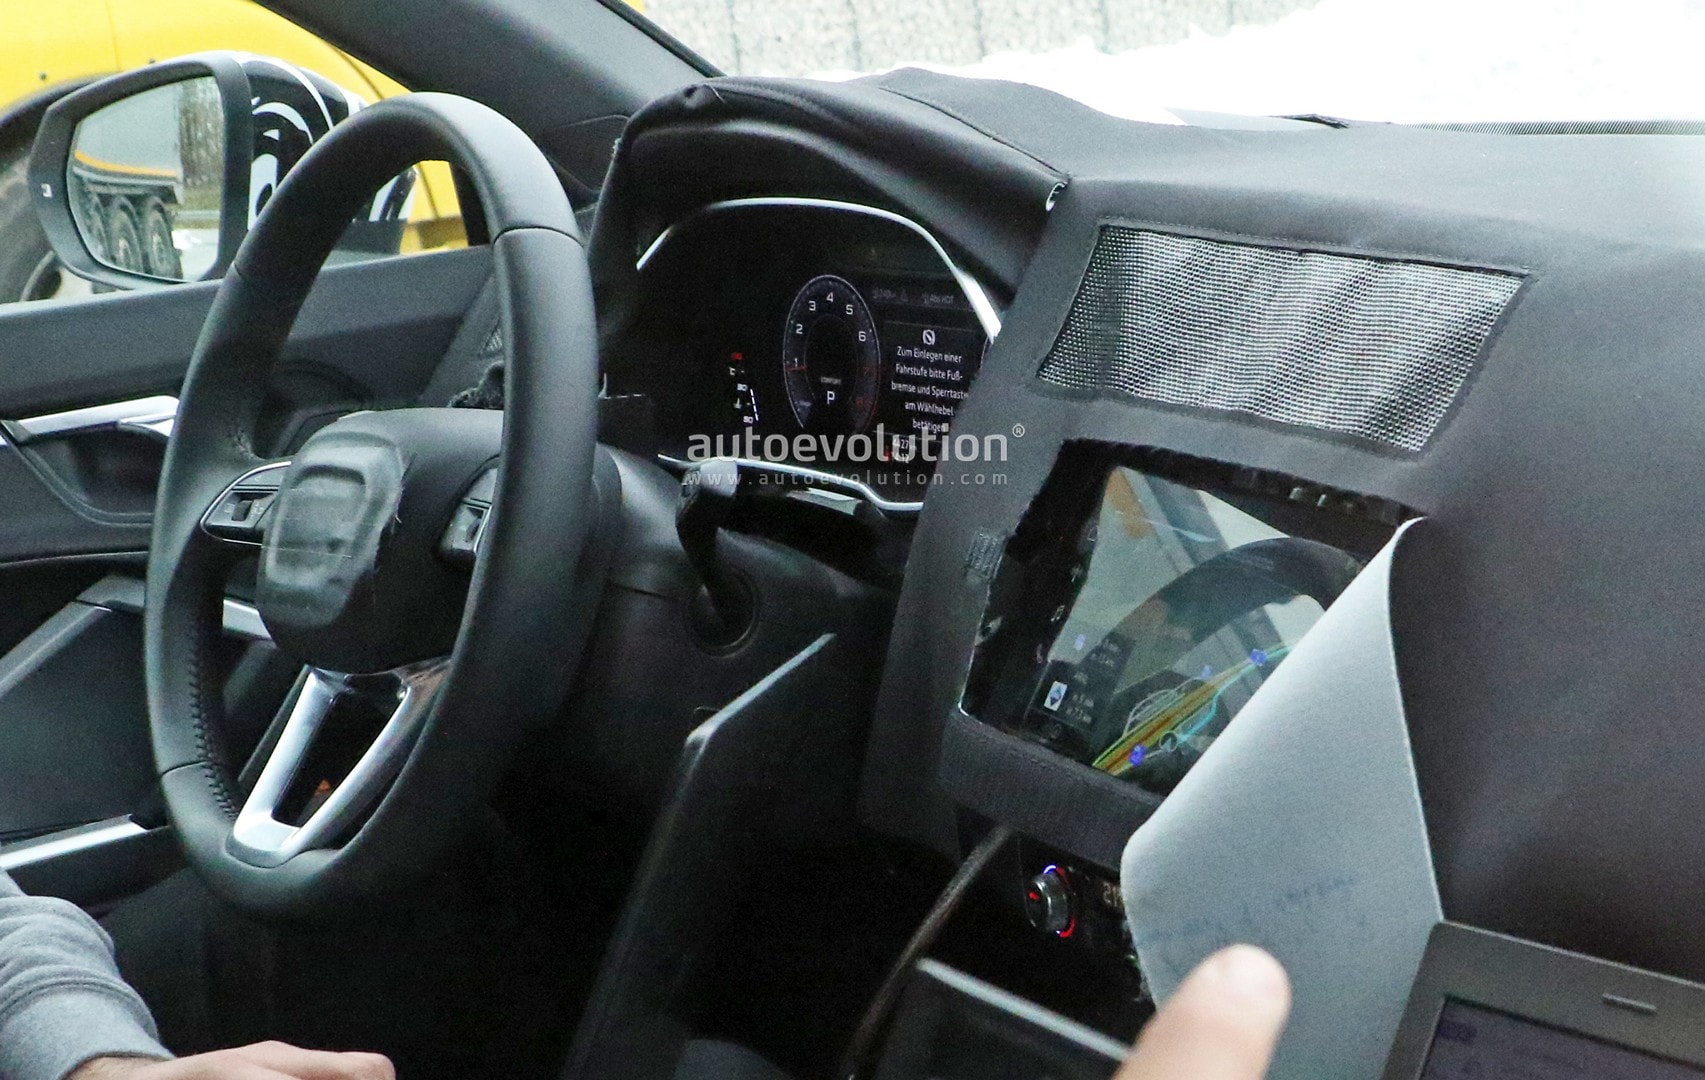 2019 Audi Q3 Interior Revealed By Latest Spyshots Could Be